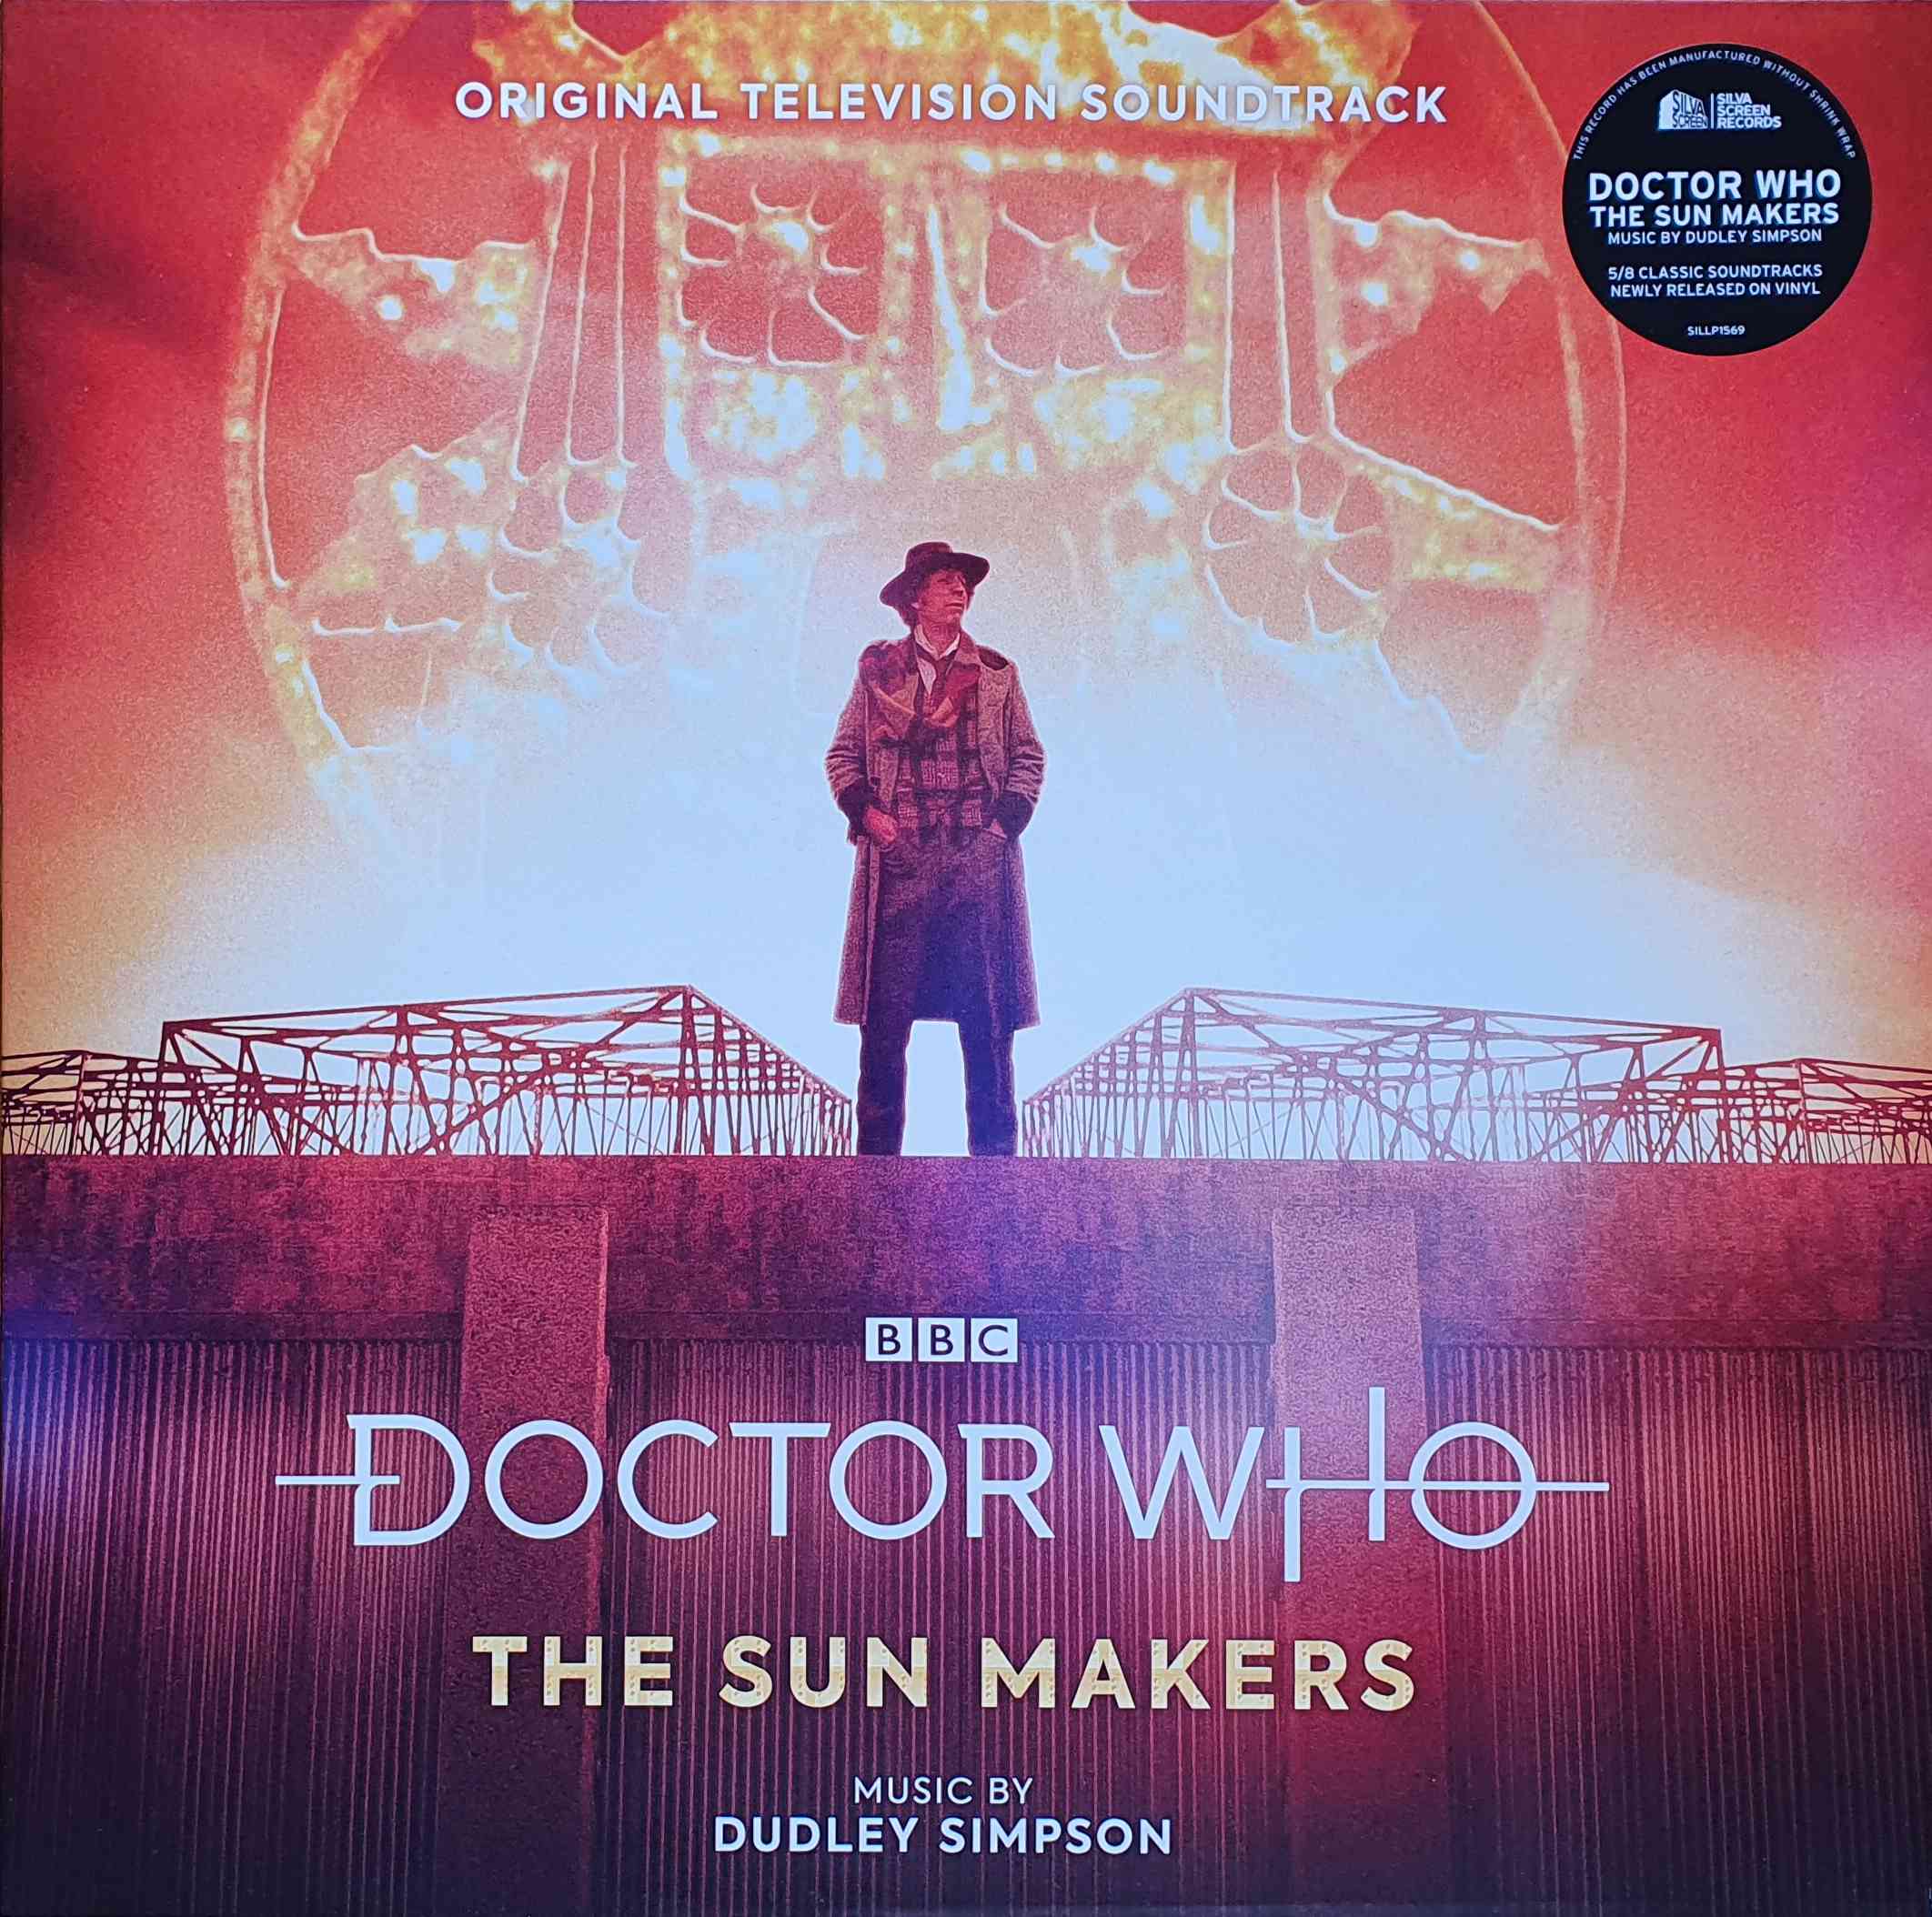 Picture of Doctor Who - The sun makers by artist Dudley Simpson from the BBC albums - Records and Tapes library